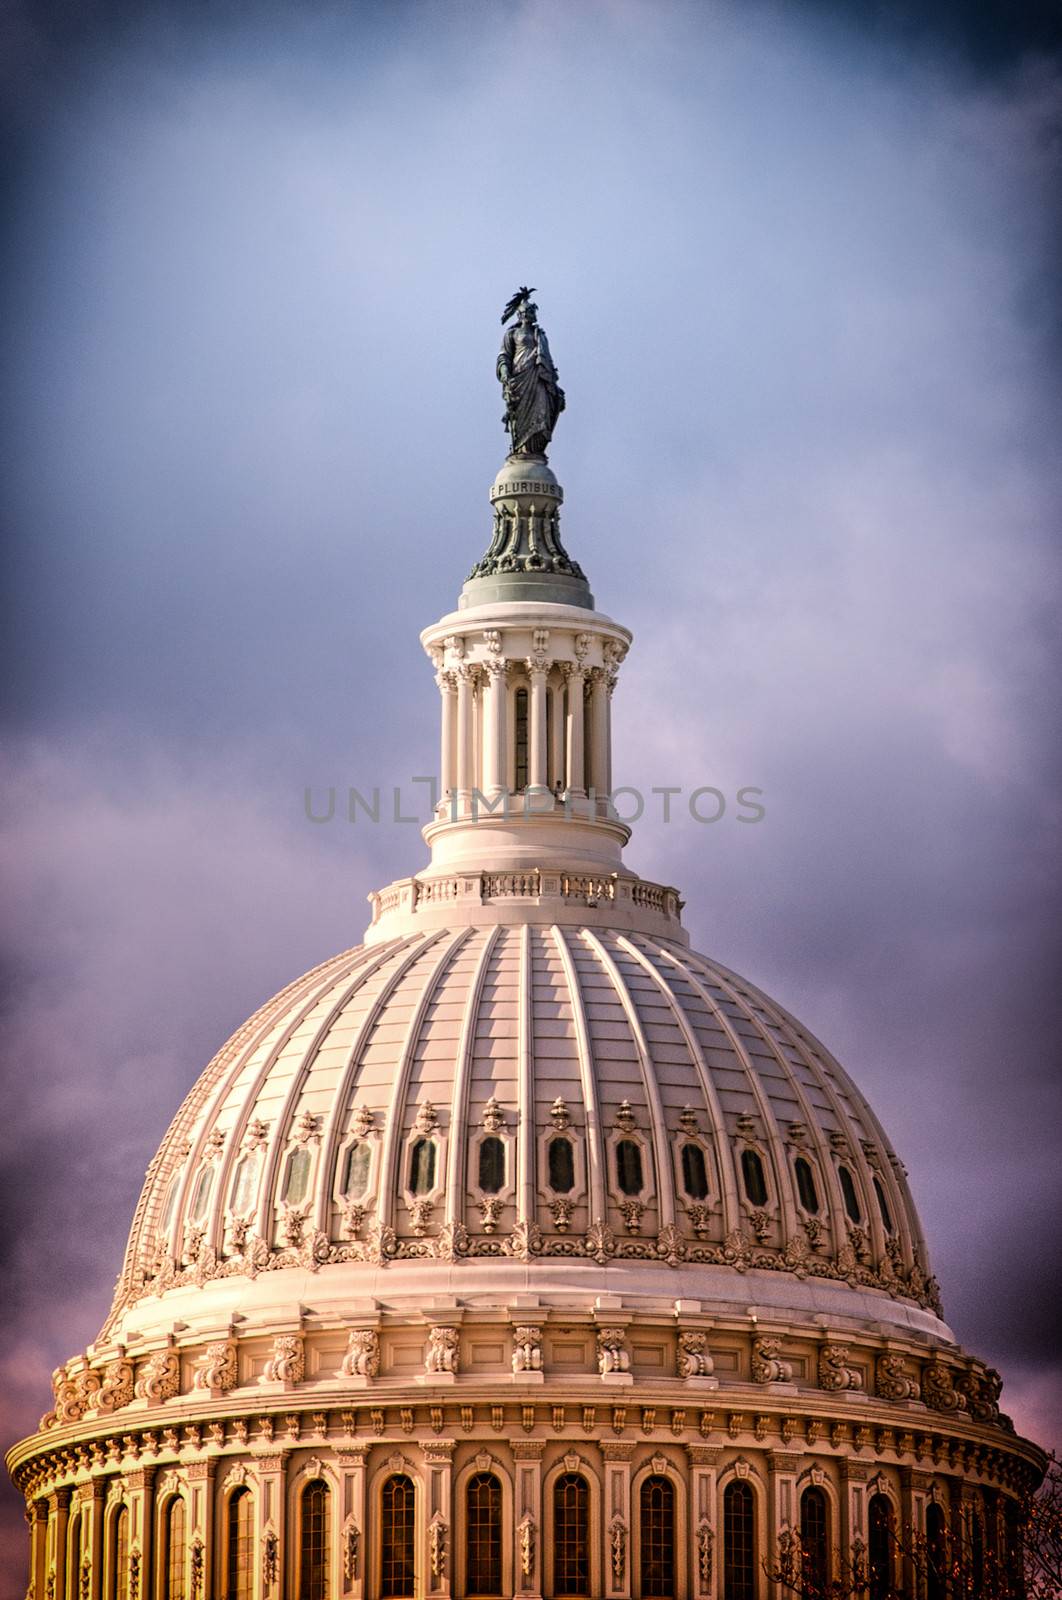 The United States Capitol dome withe the statue of Freedom on top in Washington, D.C.